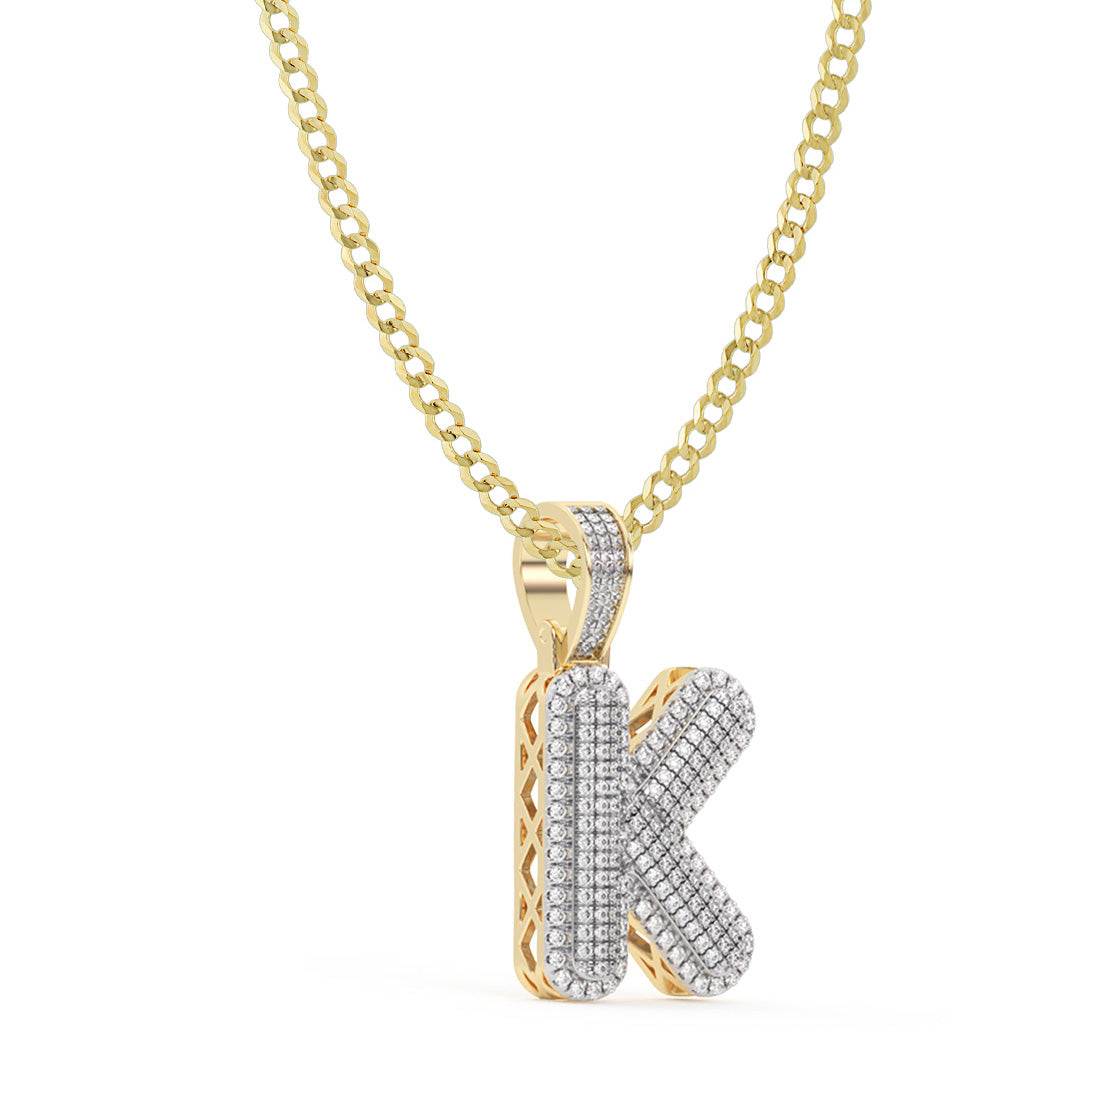 Women's Diamond "K" Initial Letter Necklace 0.40ct Solid 10K Yellow Gold